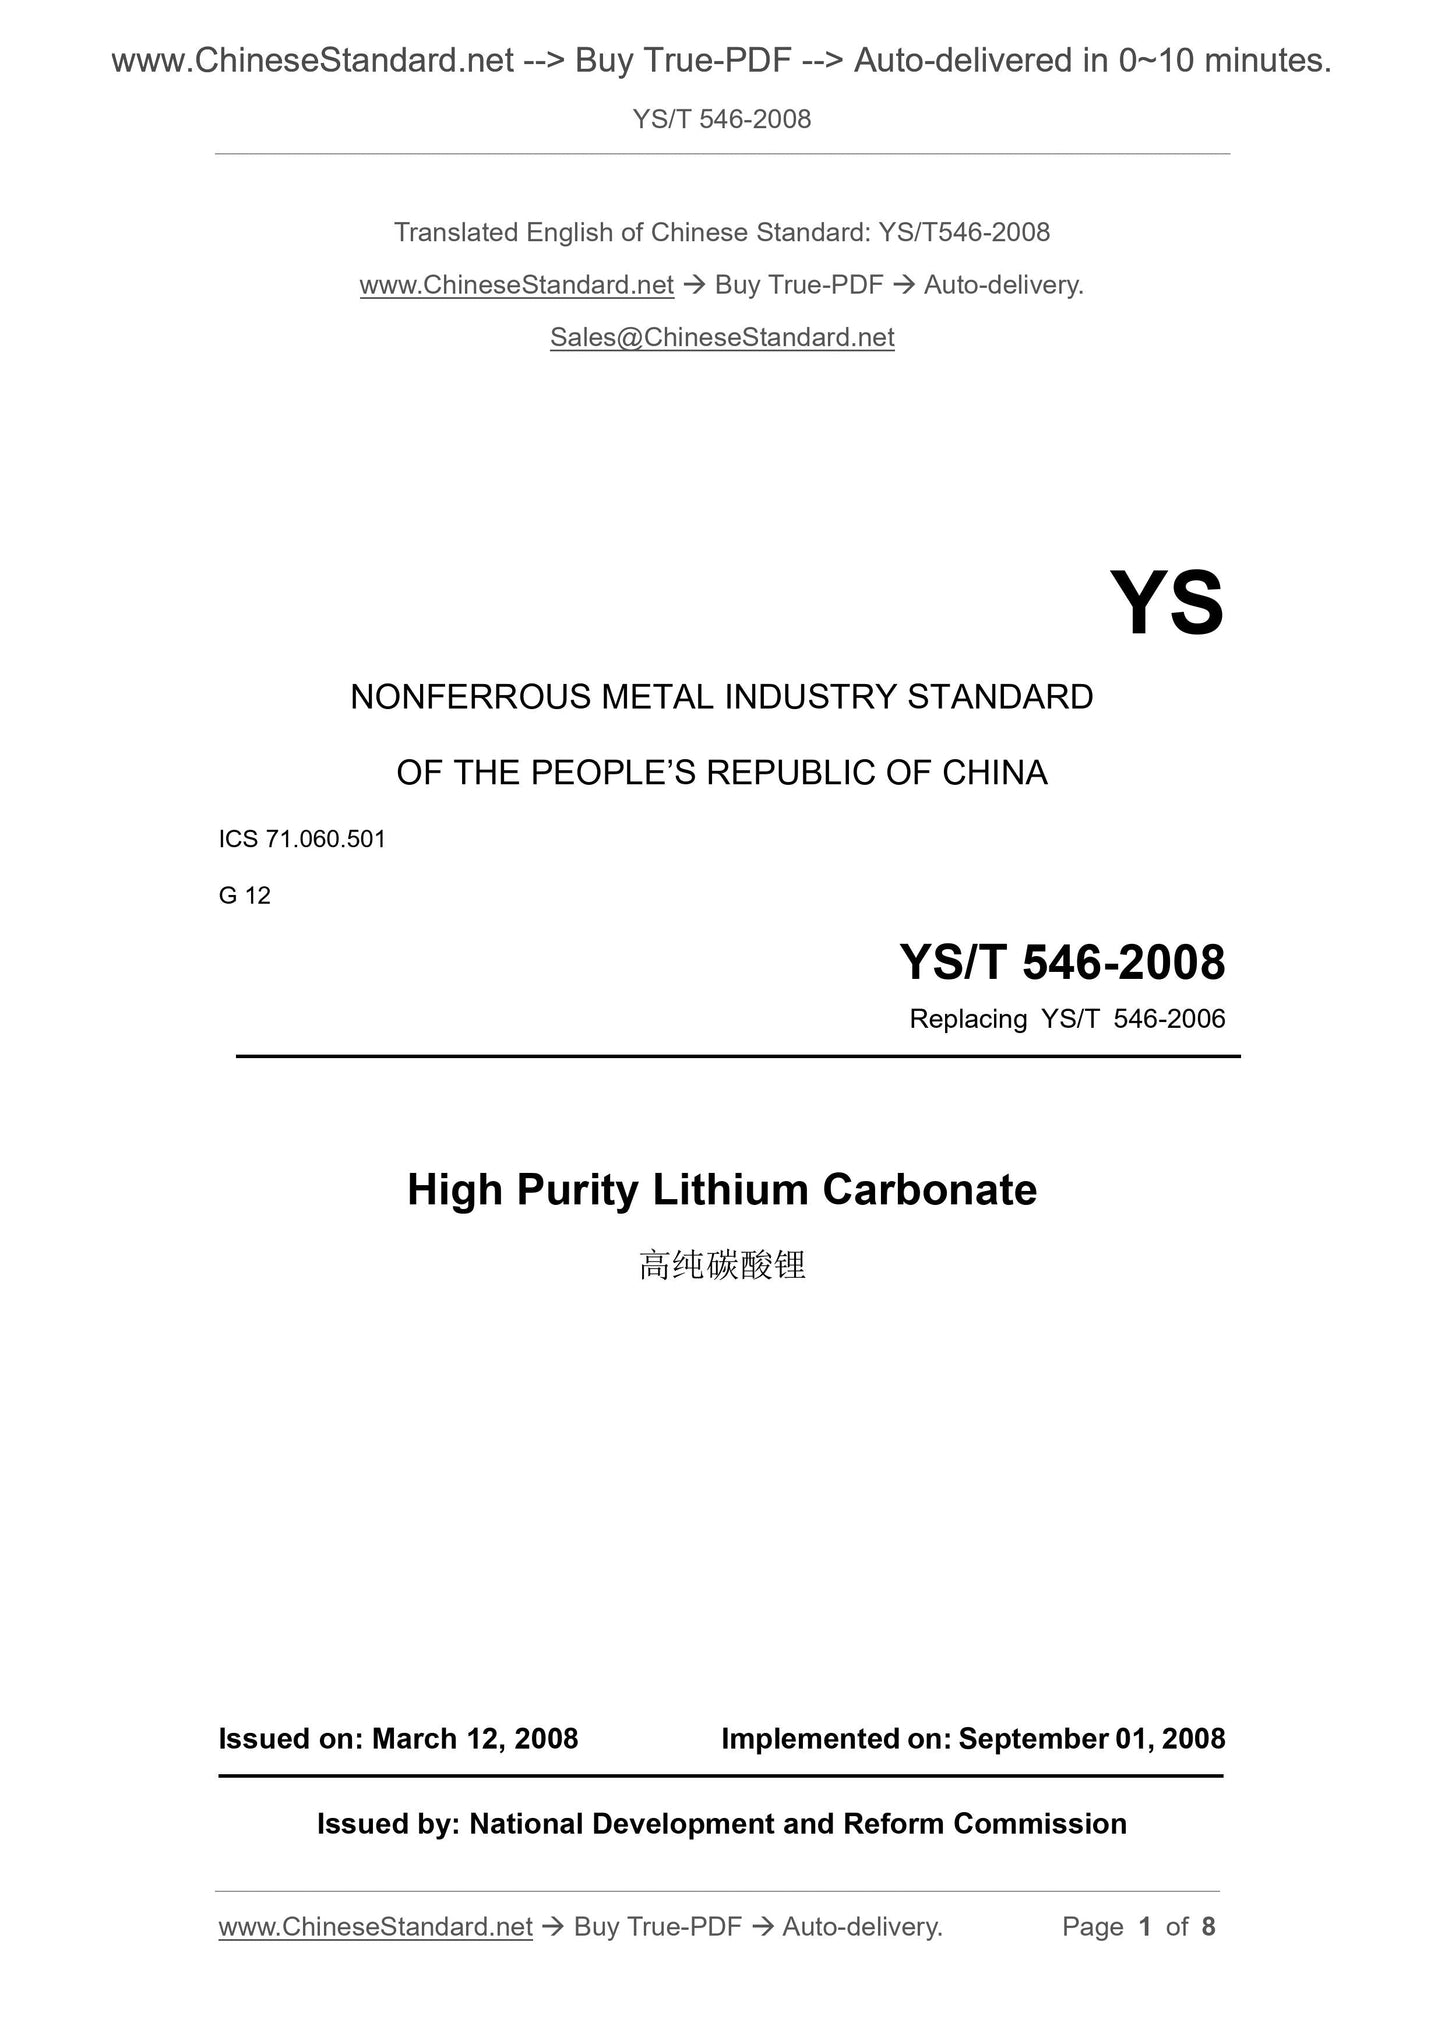 YS/T 546-2008 Page 1